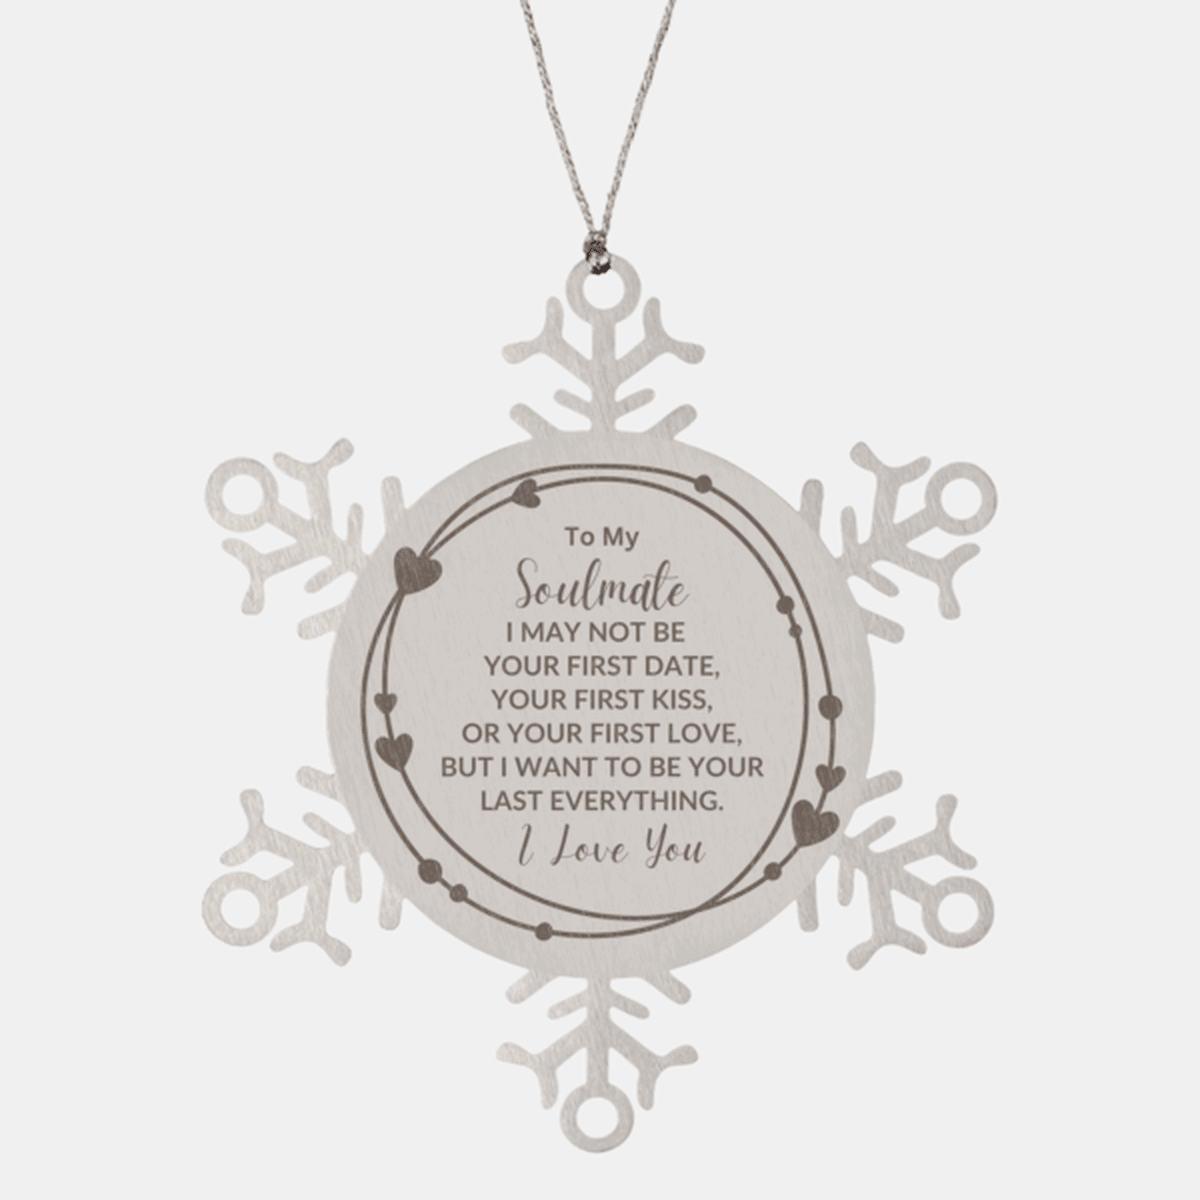 Romantic Soulmate Snowflake Engraved Ornament - I Want to be Your Last Everything - Birthday, Christmas Holiday, Valentine Gifts - Mallard Moon Gift Shop